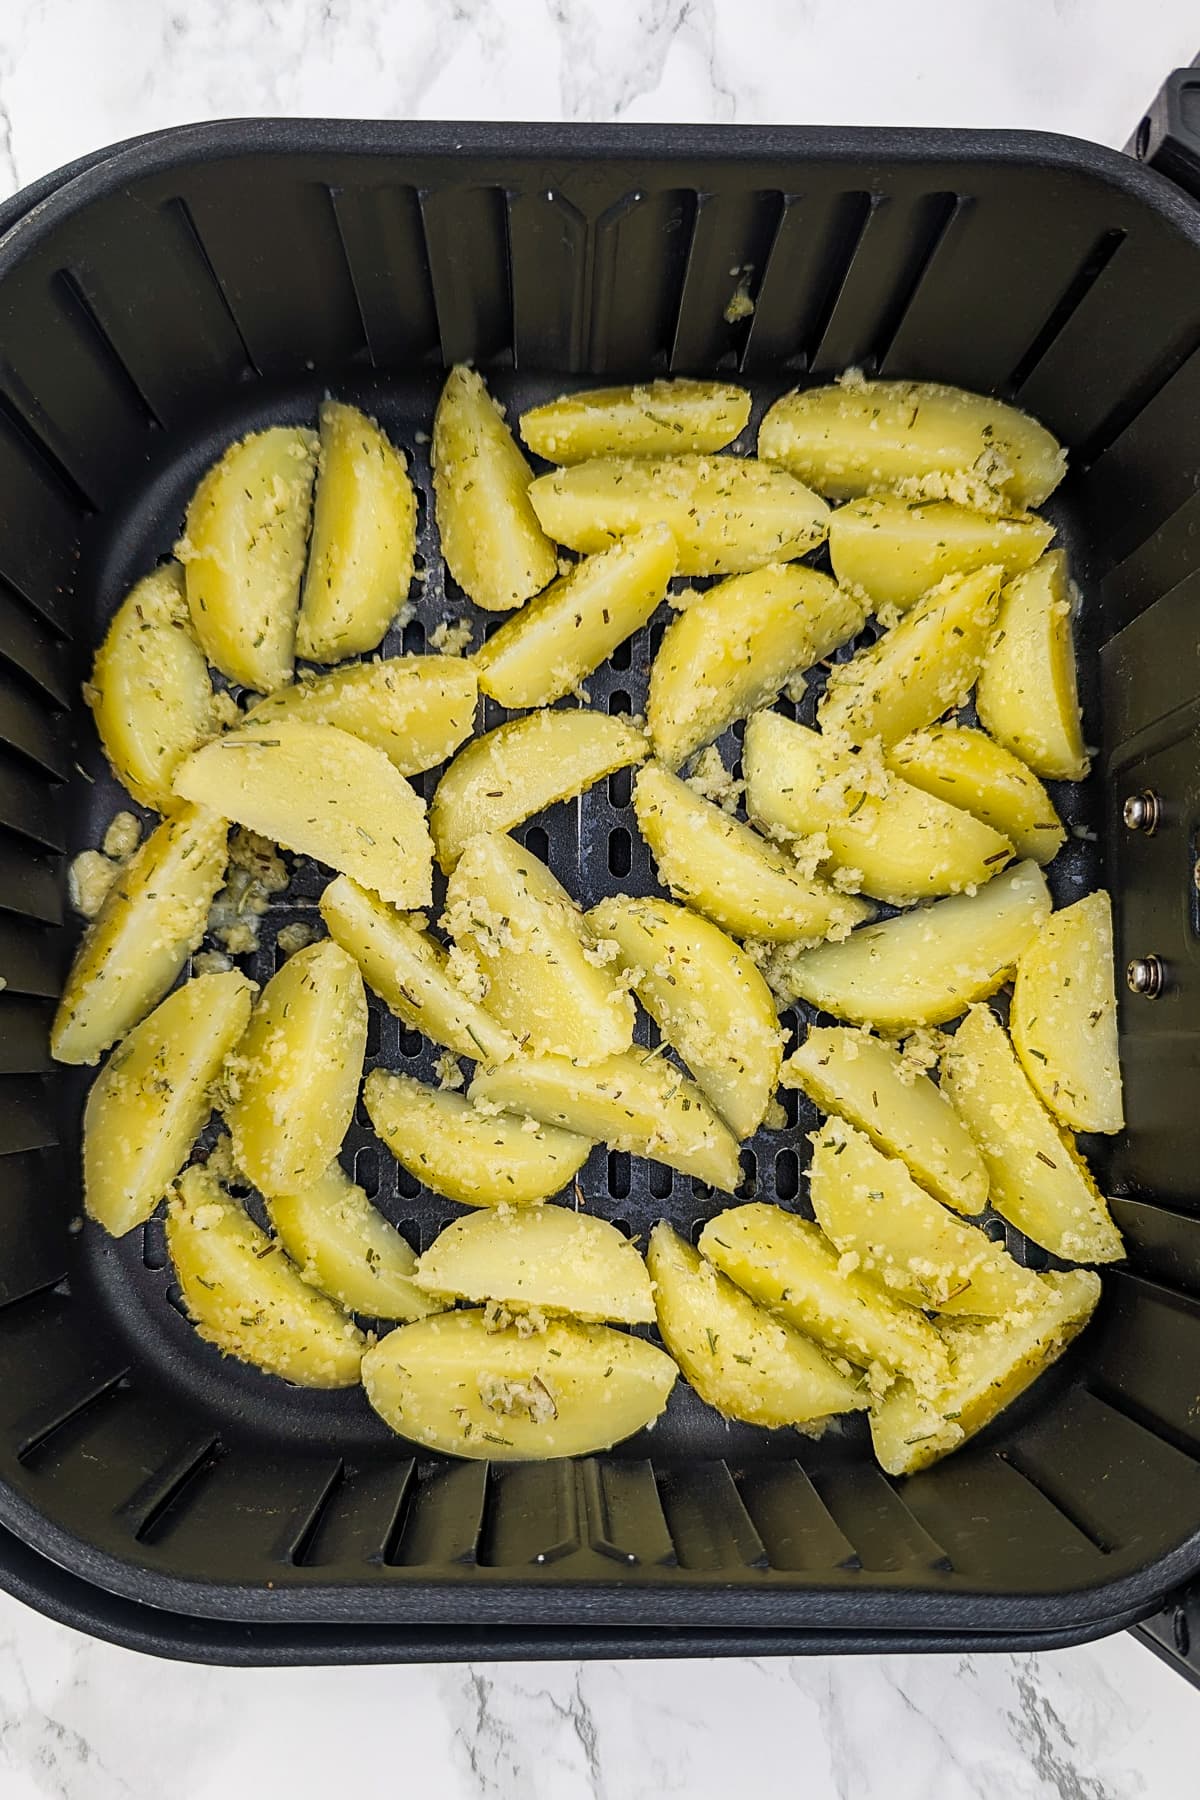 Top view of air fryer basket with potato wedges seasoned with garlic, rosemary and parmesan.